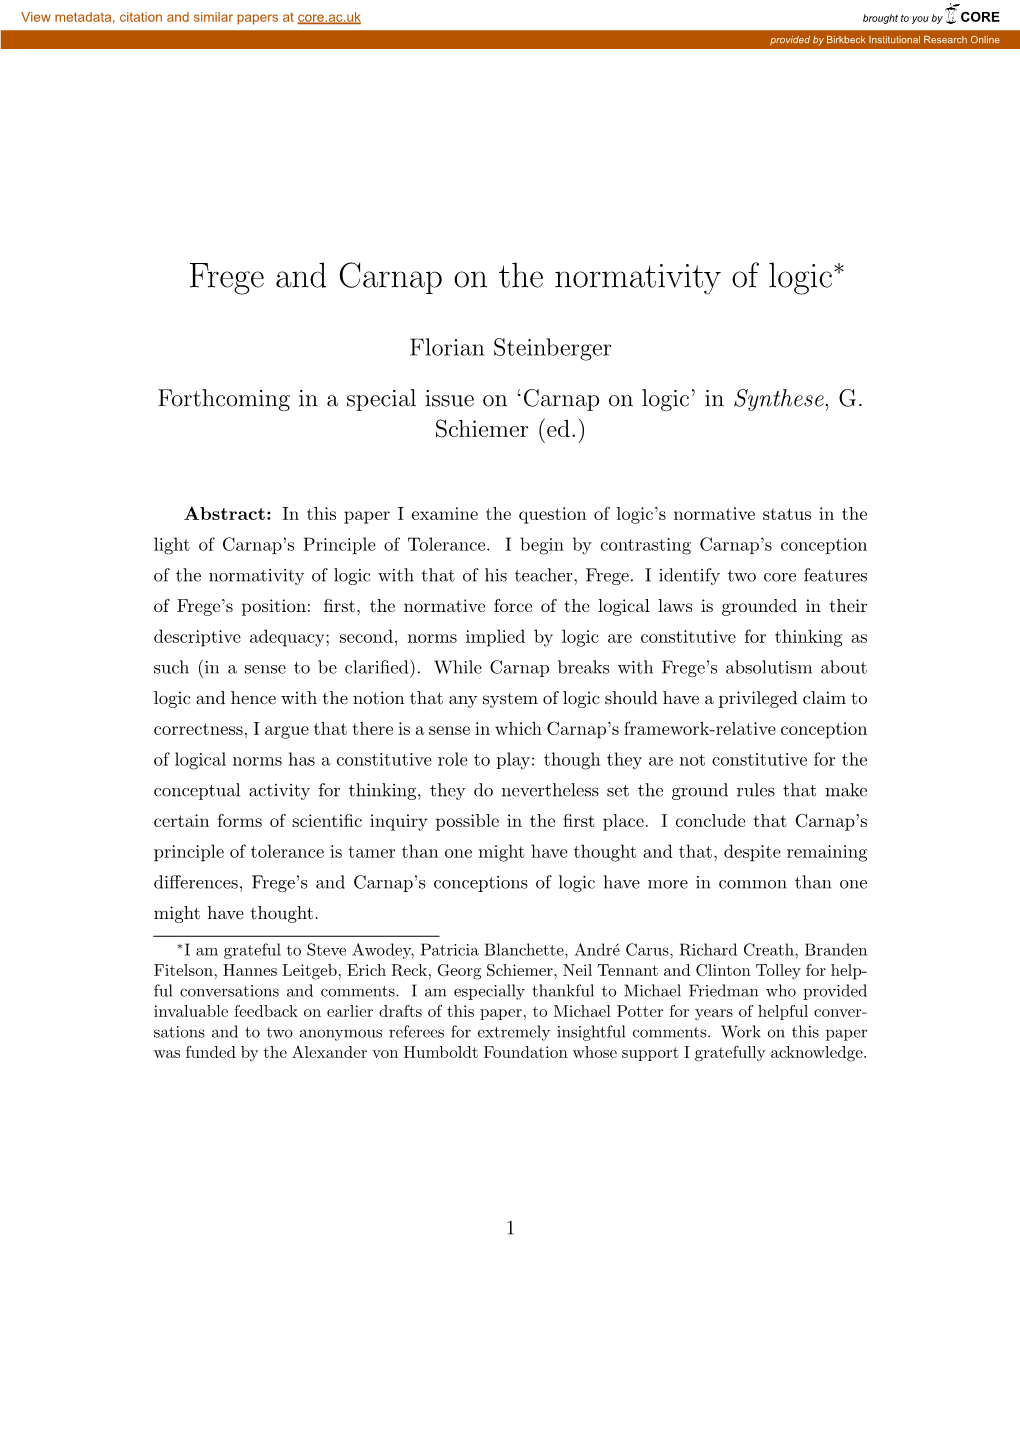 Frege and Carnap on the Normativity of Logic∗